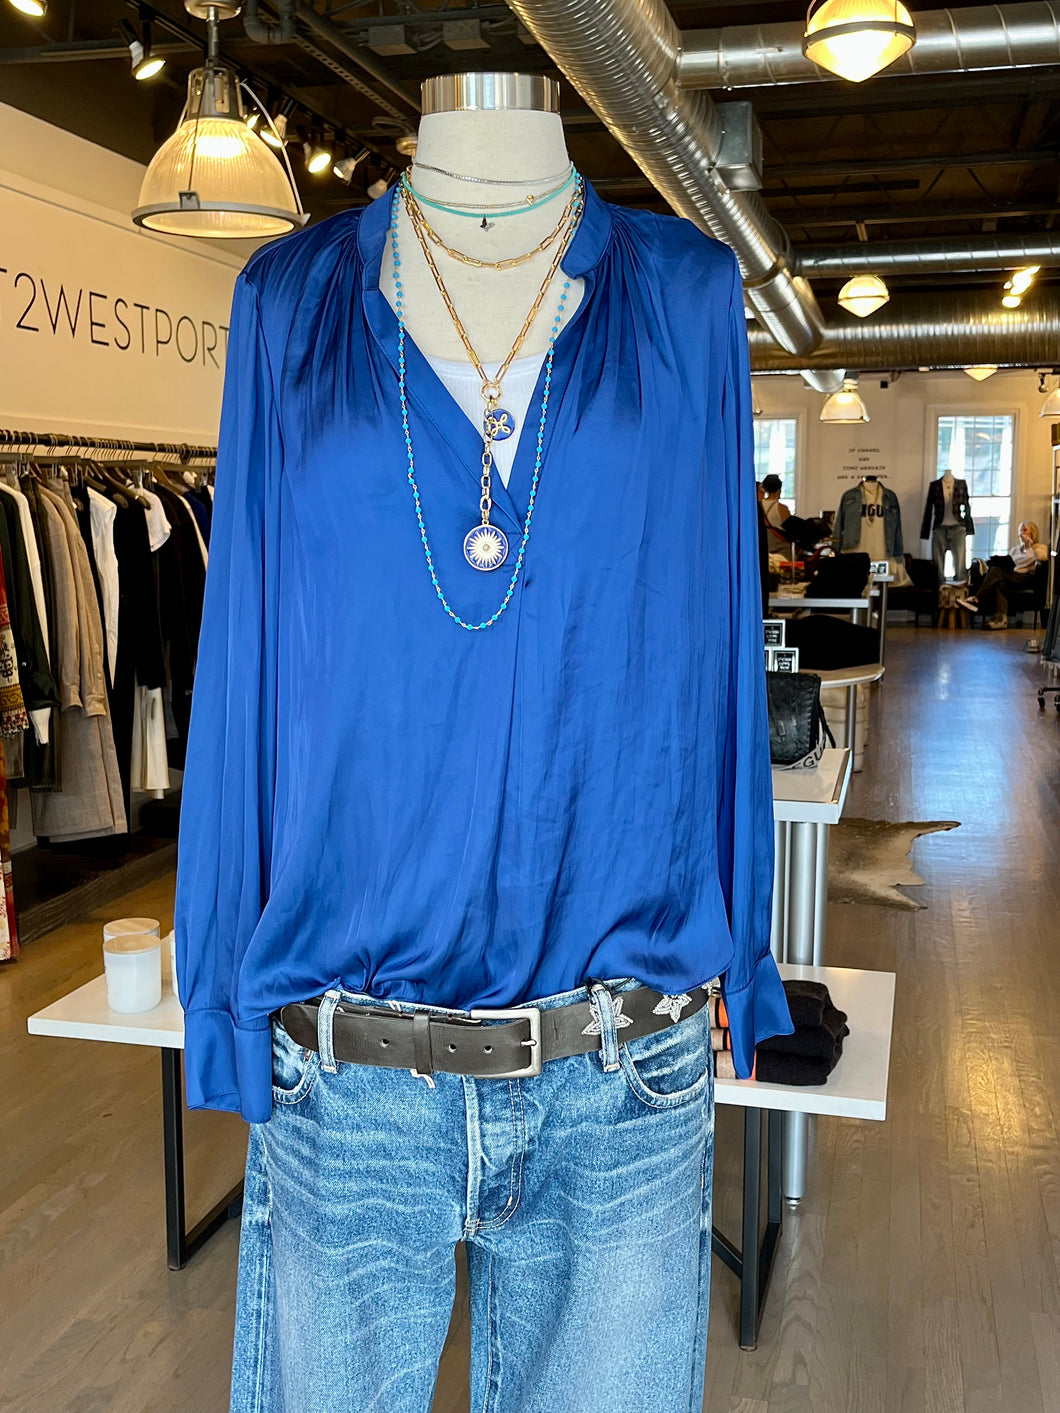 zadig & voltaire tink satin blouse with moussy jeans and dylan james jewelry at west2westport.com